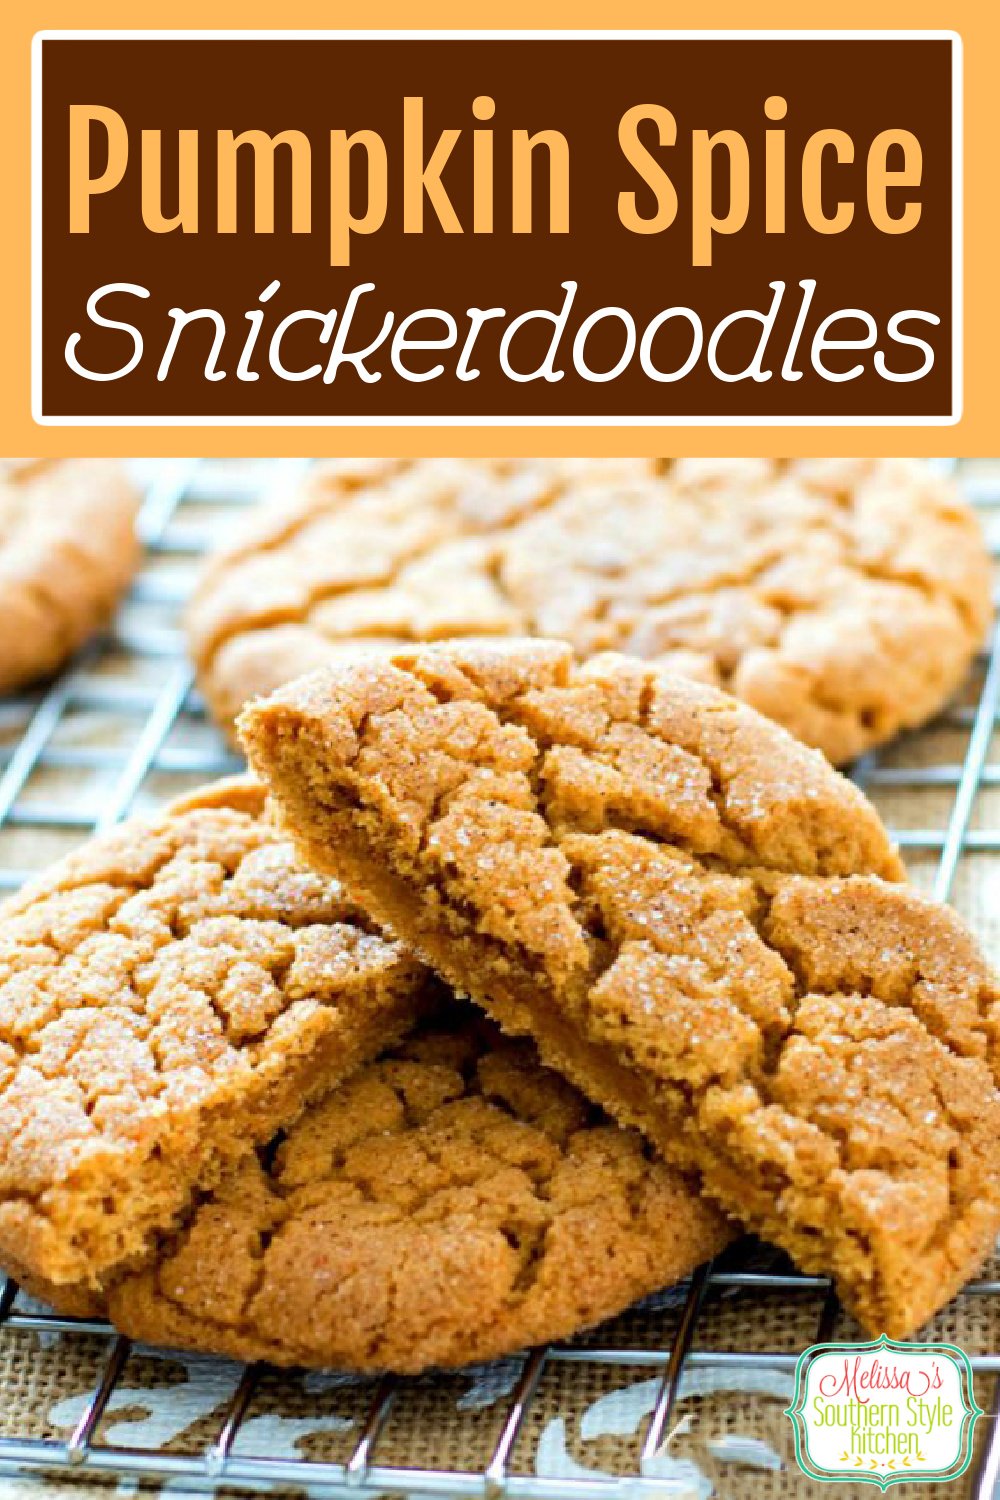 These sweet and spicy seasonal cookies won't last long in your fall cookie jar #snickerdoodles #pumpkinspice #cookies #cookierecipes #holidayrecipes #holidaybaking #pumpkincookies #pumpkinrecipes #fallbaking #desserts #cookieswap #christmascookies #southernfood via @melissasssk